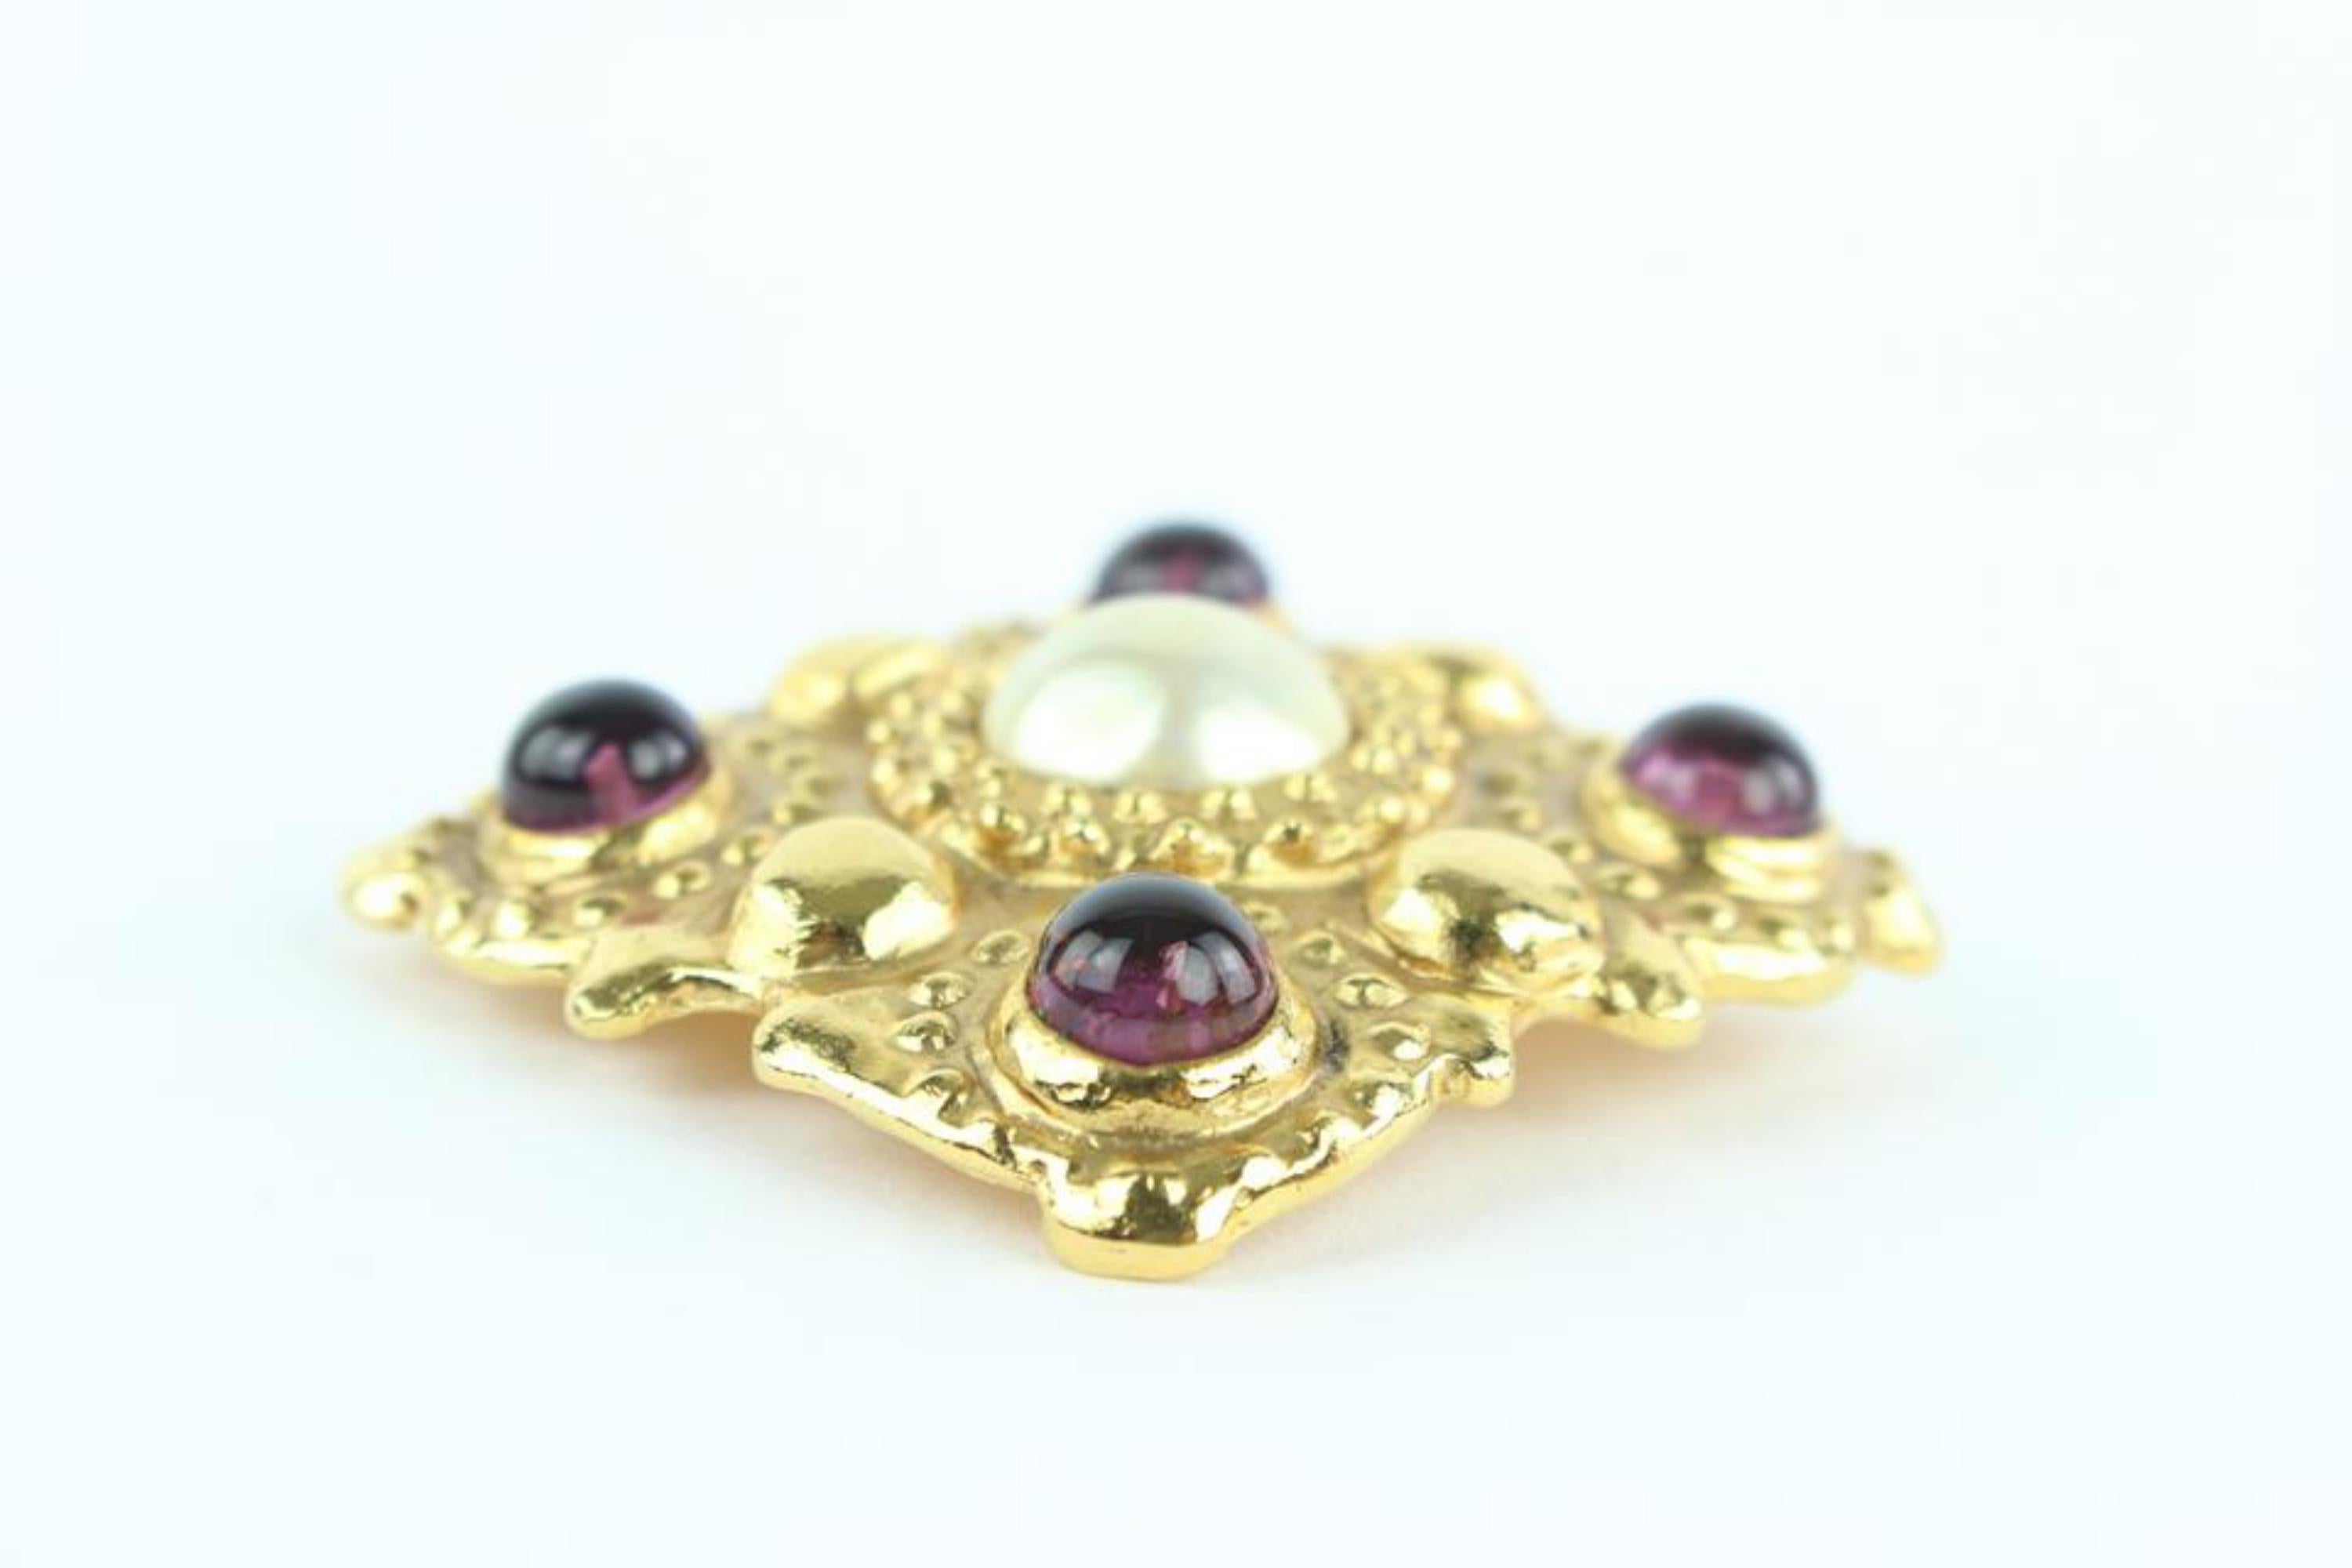 Chanel Gold Pearl Gripoix Stone 8cz1012 Brooch/Pin For Sale 5